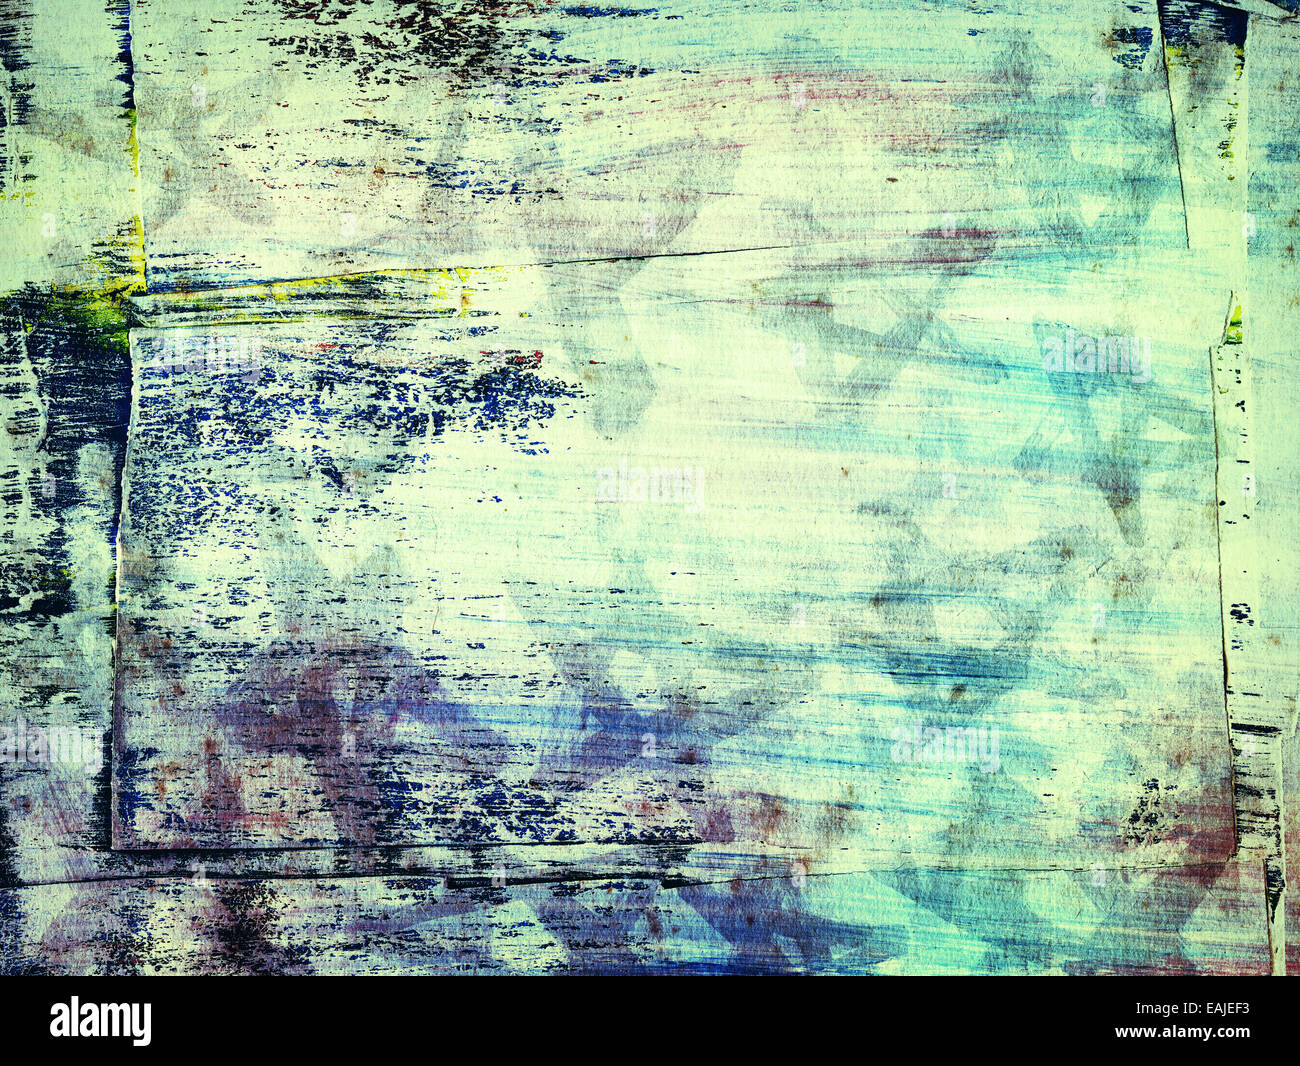 abstract painted grunge collage background Stock Photo